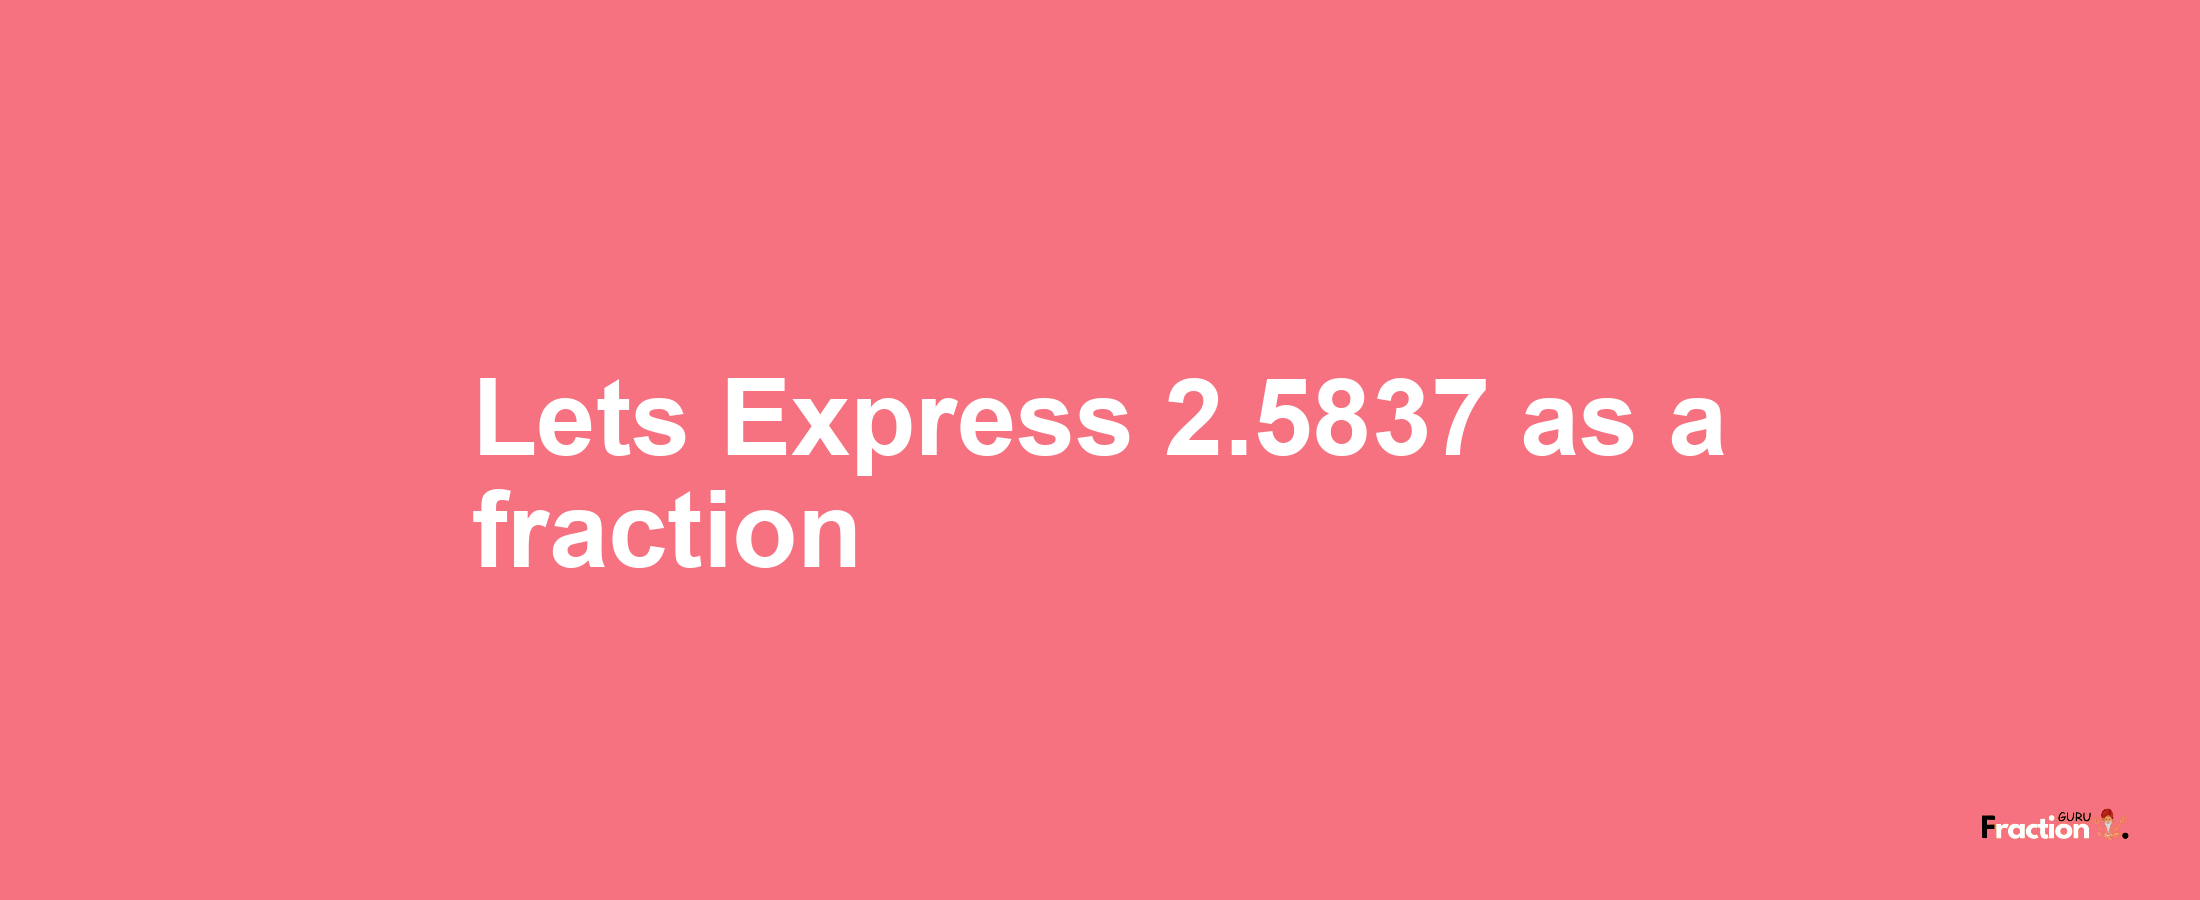 Lets Express 2.5837 as afraction